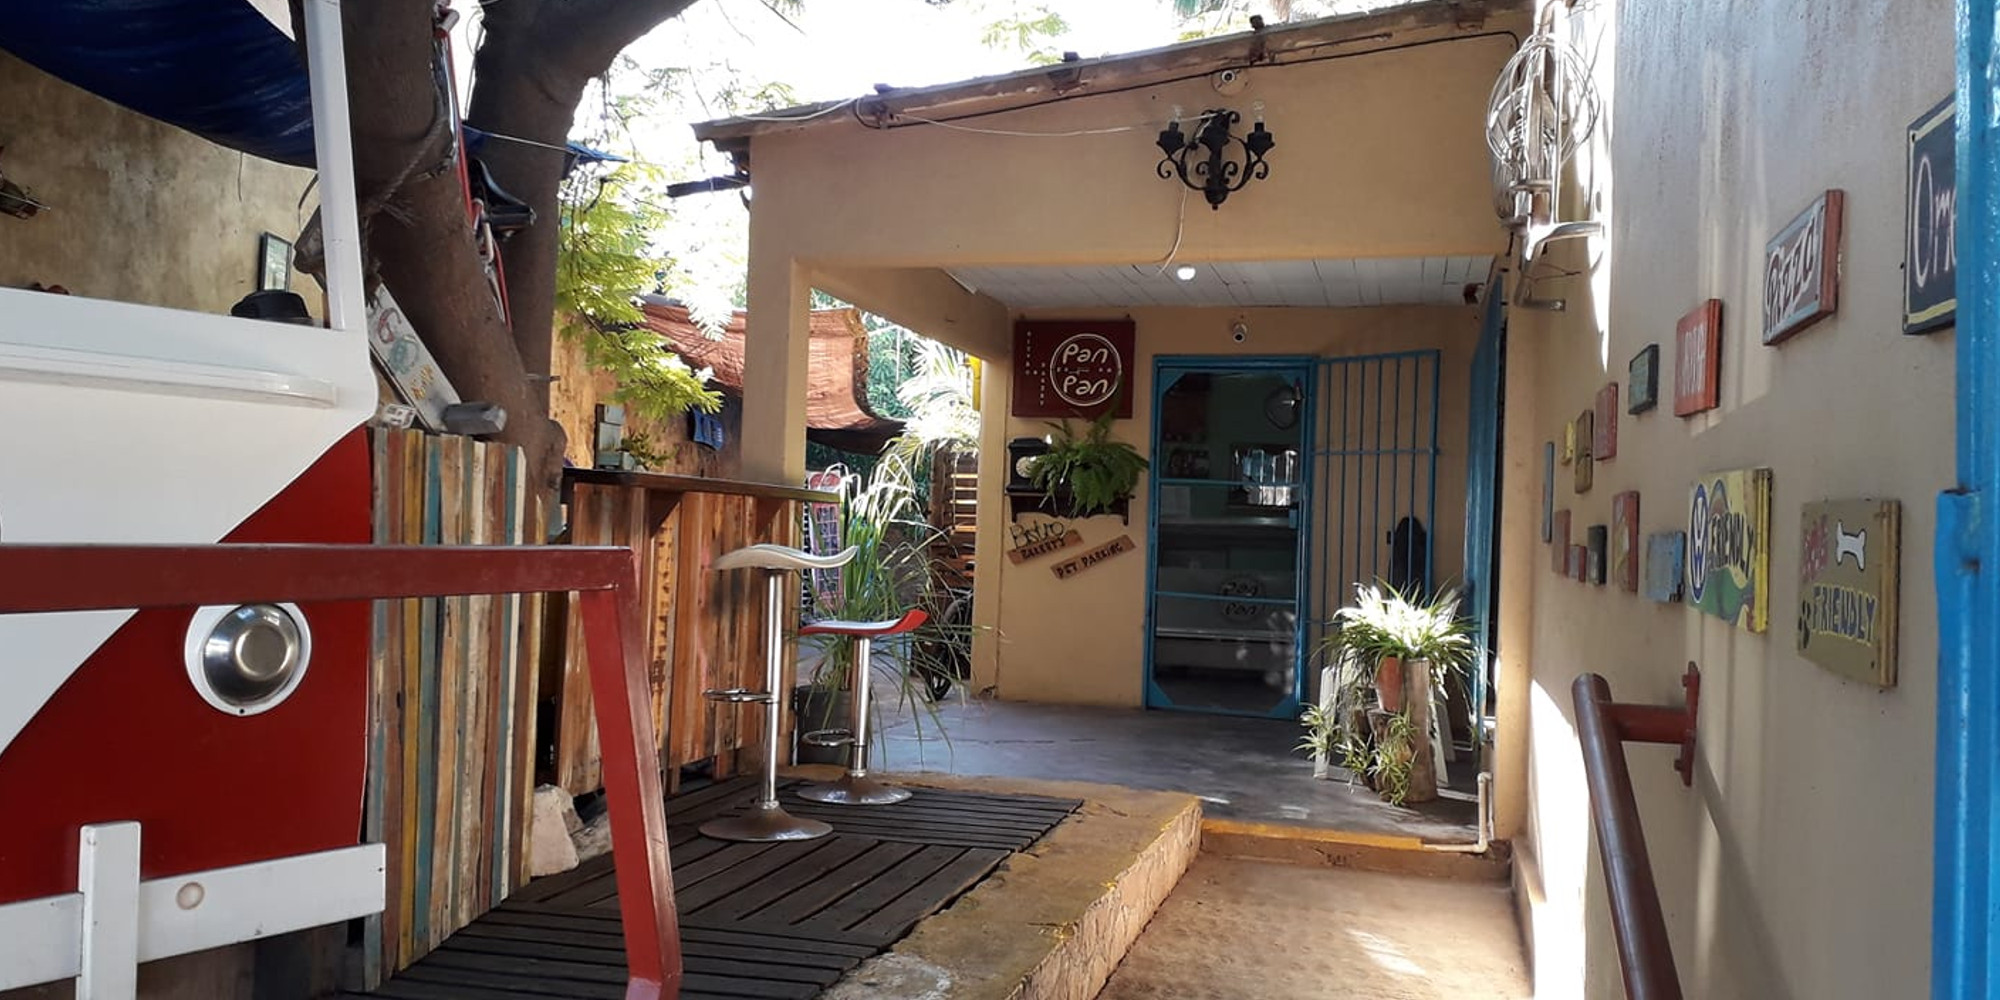 Outside of Pan Que Pan, a local favorite bakery in the town square of Loreto, Baja California Sur